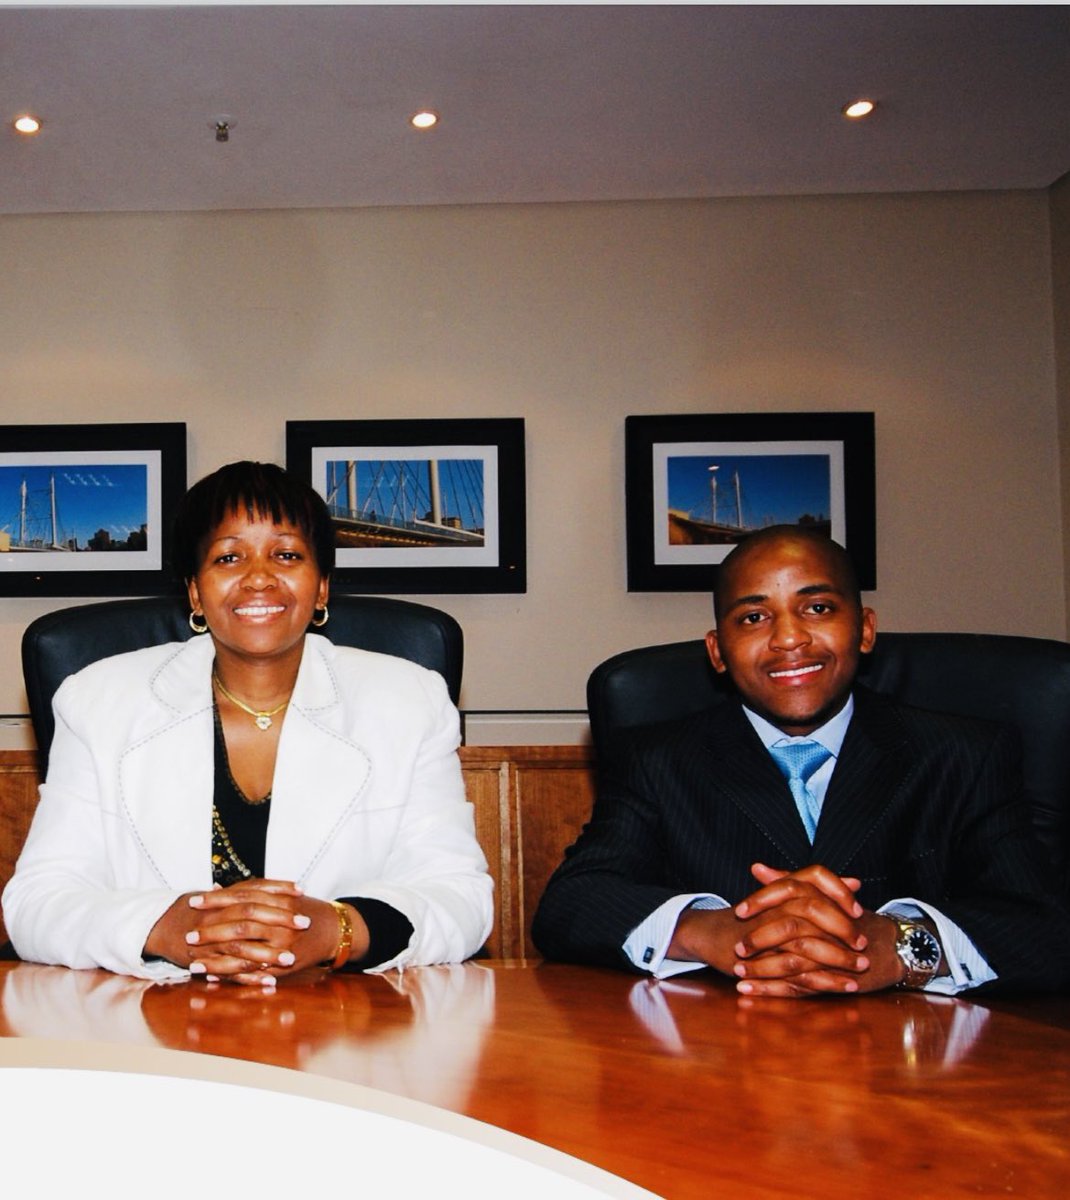 We have BEEN sitting in these boards….but the fit of my suit lord. I was only 22. My mom and business partner sometimes pinching me under the table. On some “Ye wena…o reng?”😭🫣 #HumbleBeginnings